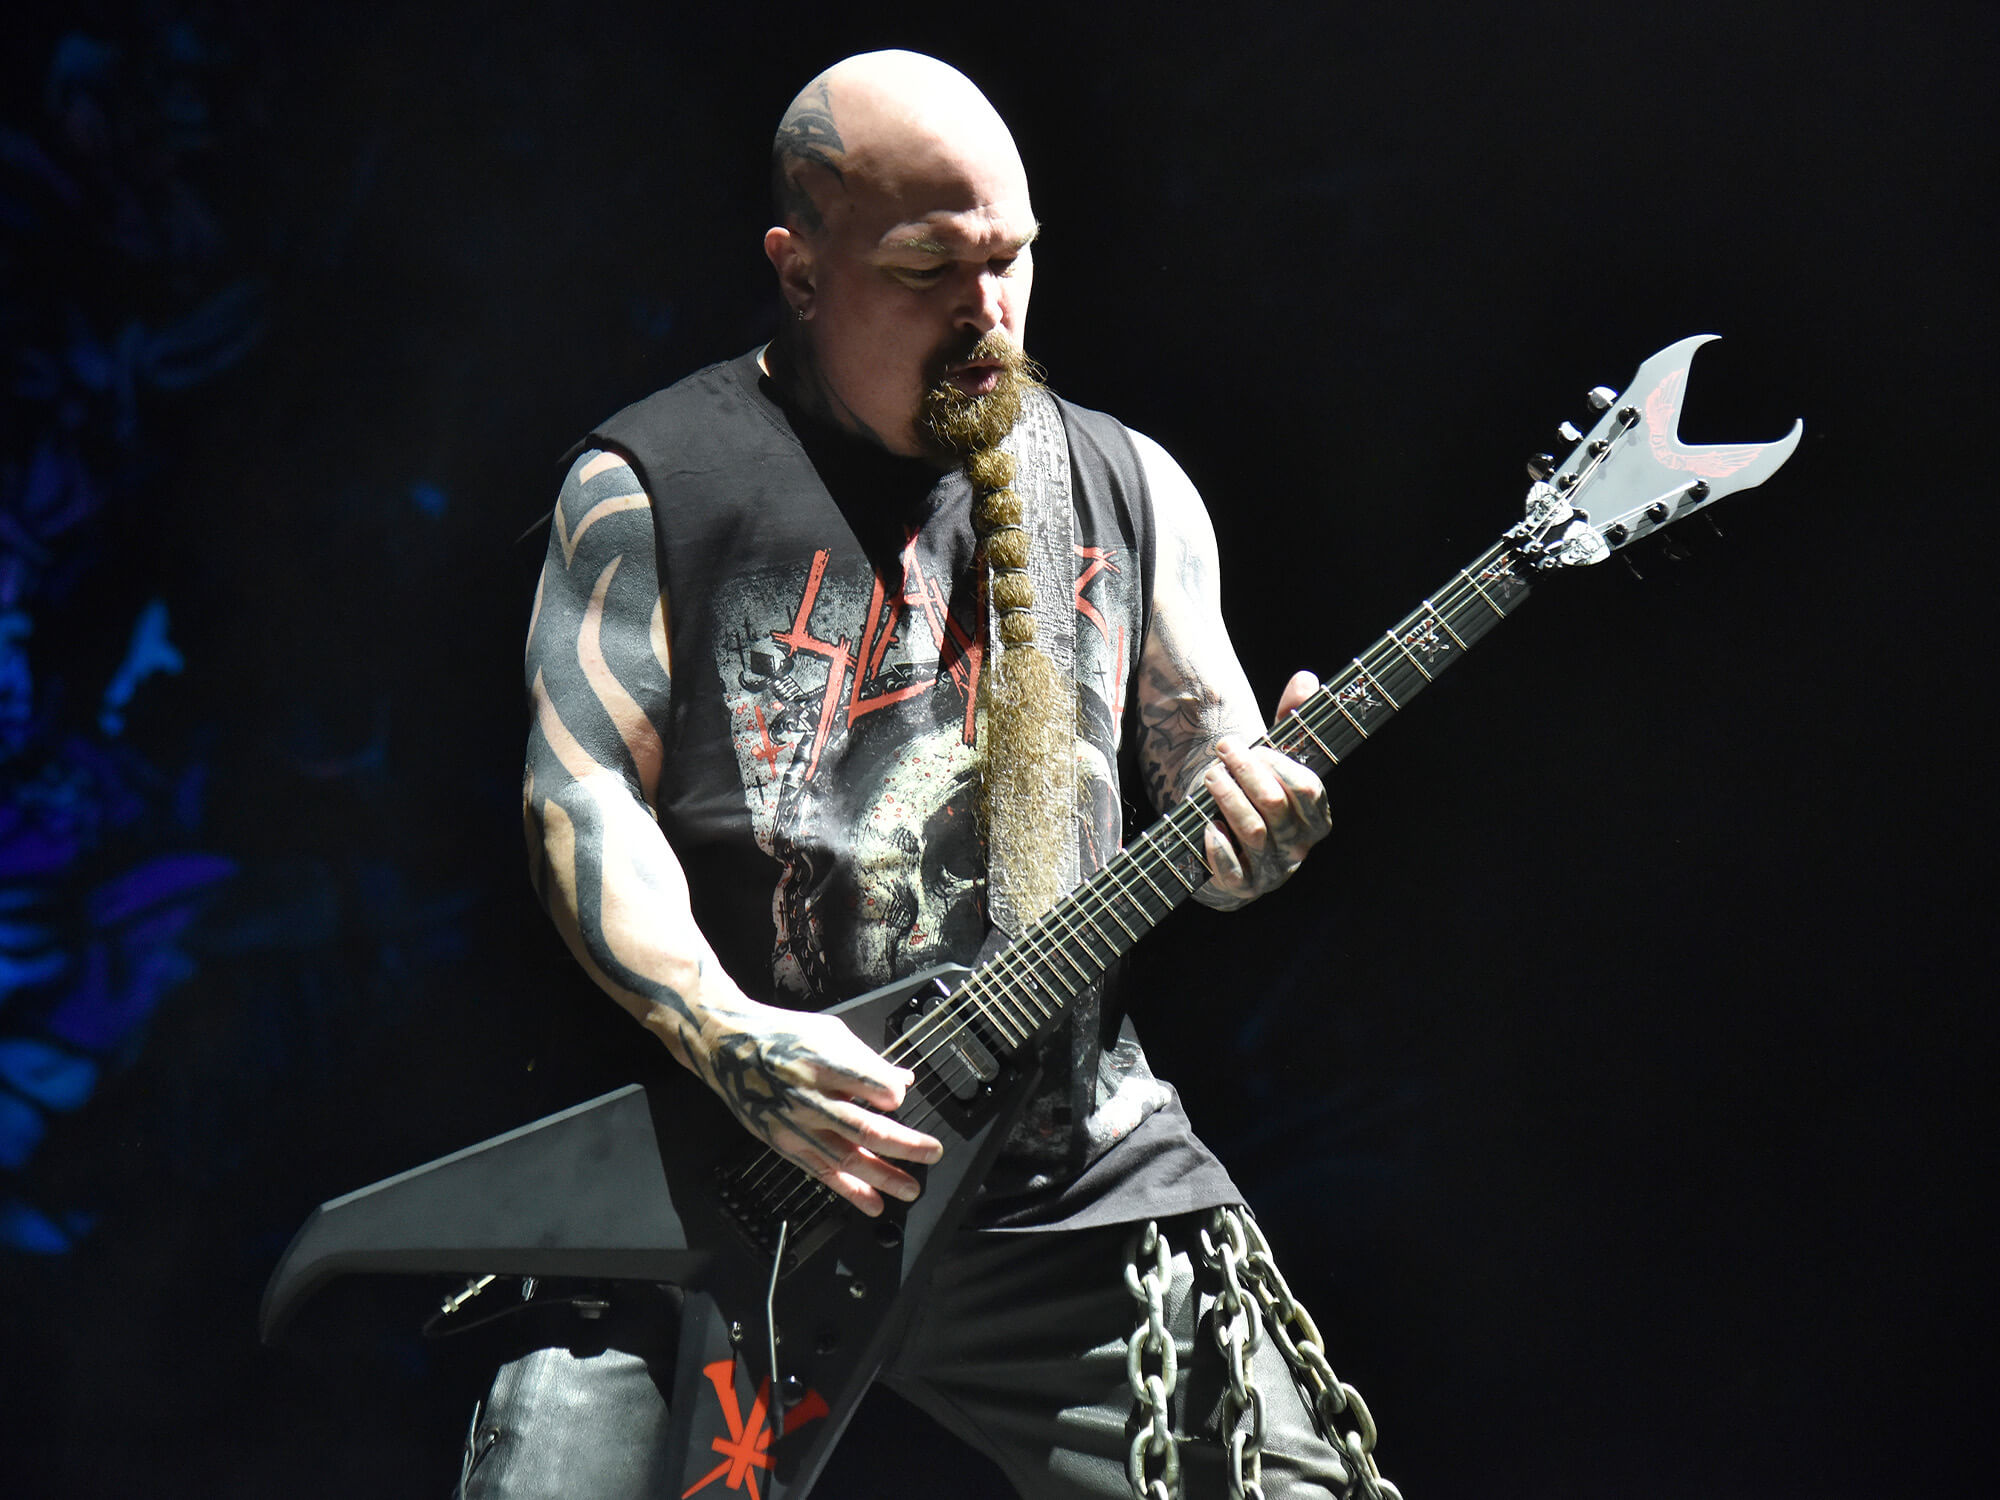 Kerry King on stage with his Dean guitar